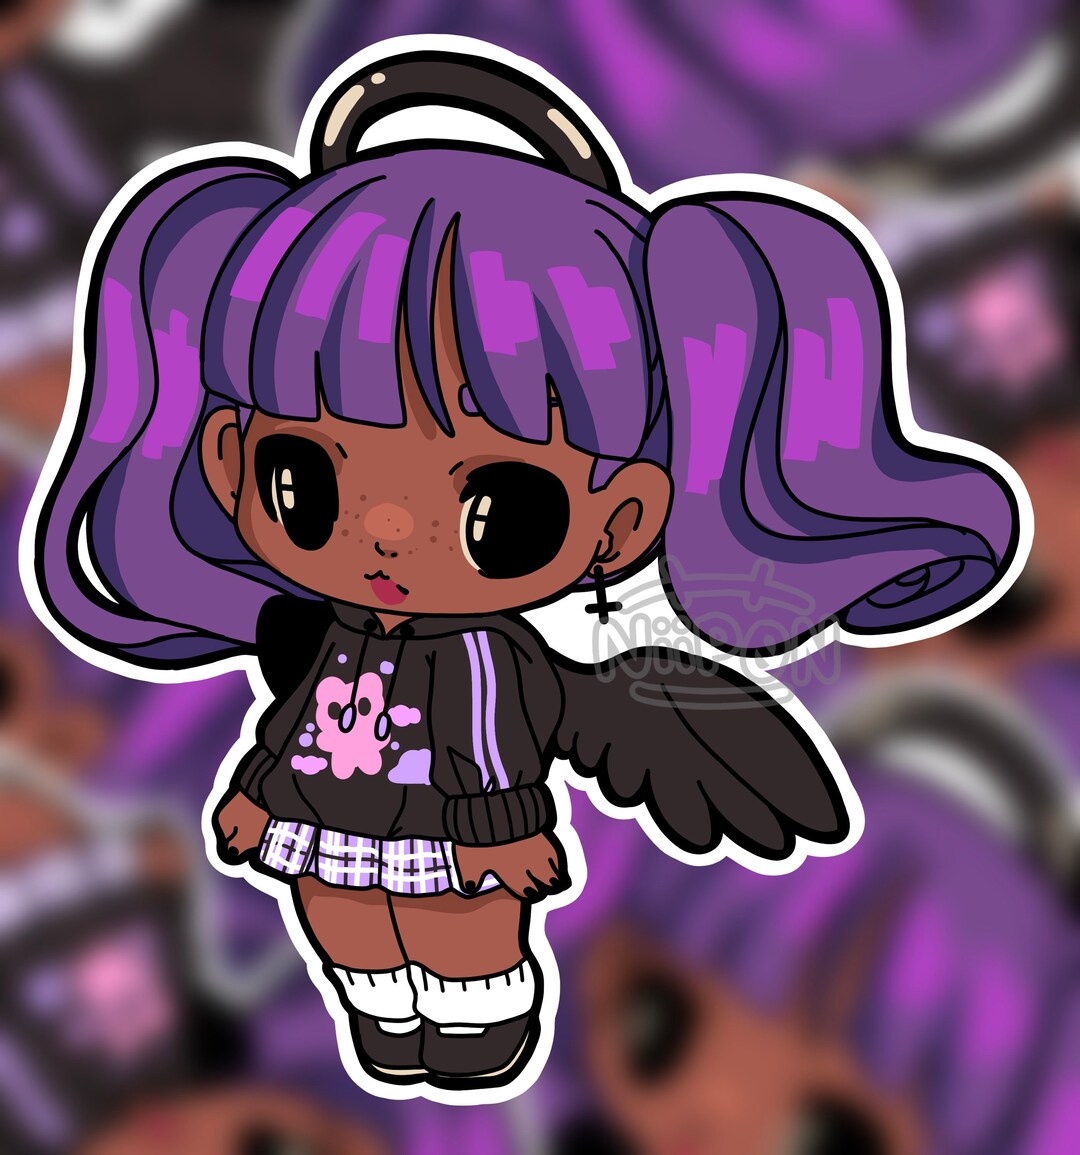 Fashion Angels Totes Adorbs Series 2 Stickers - Free Shipping